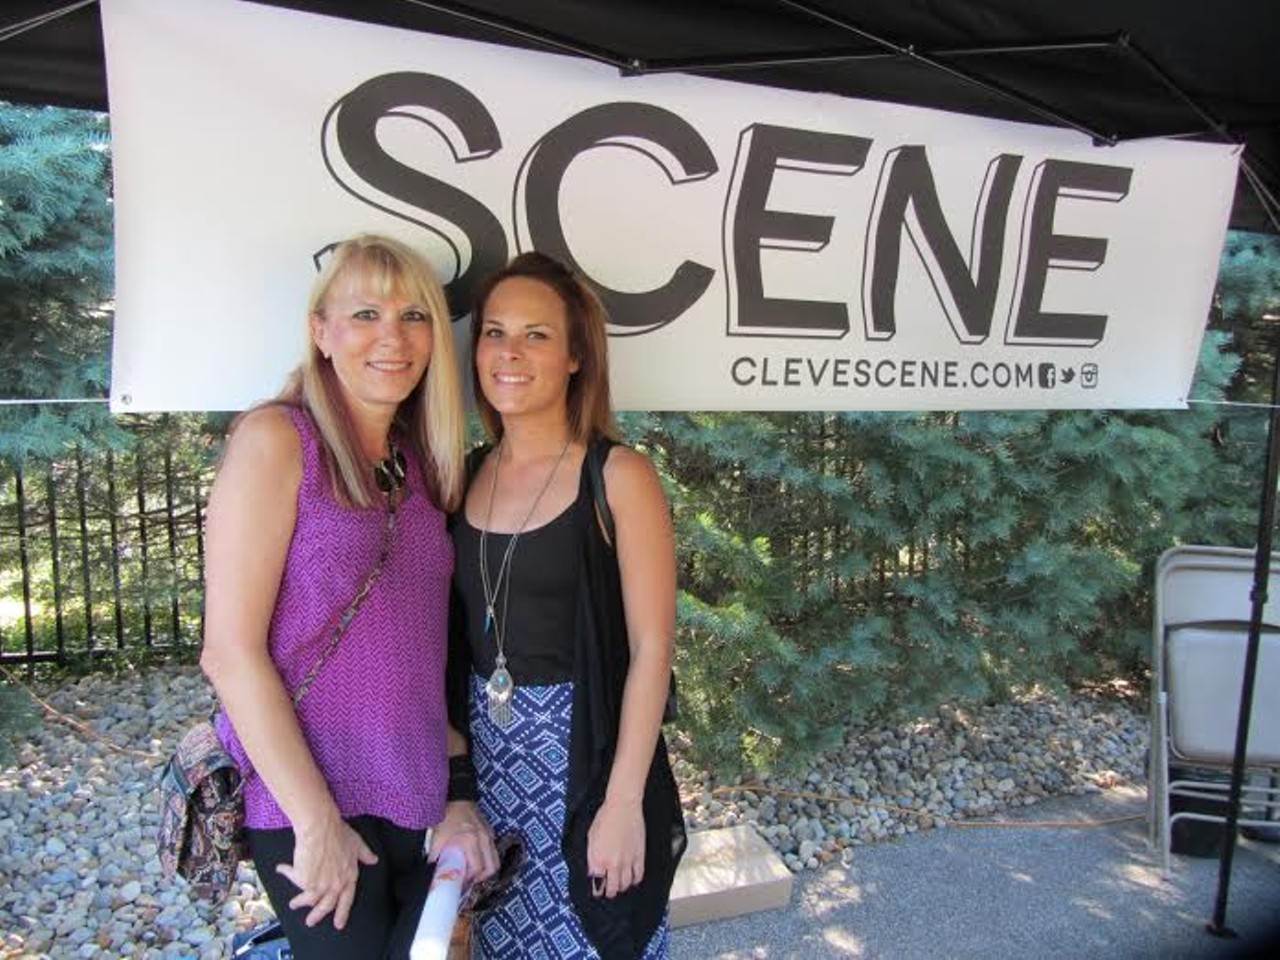 Photos of the Scene Events Team Driven by Fiat of Strongsville at OneRepublic